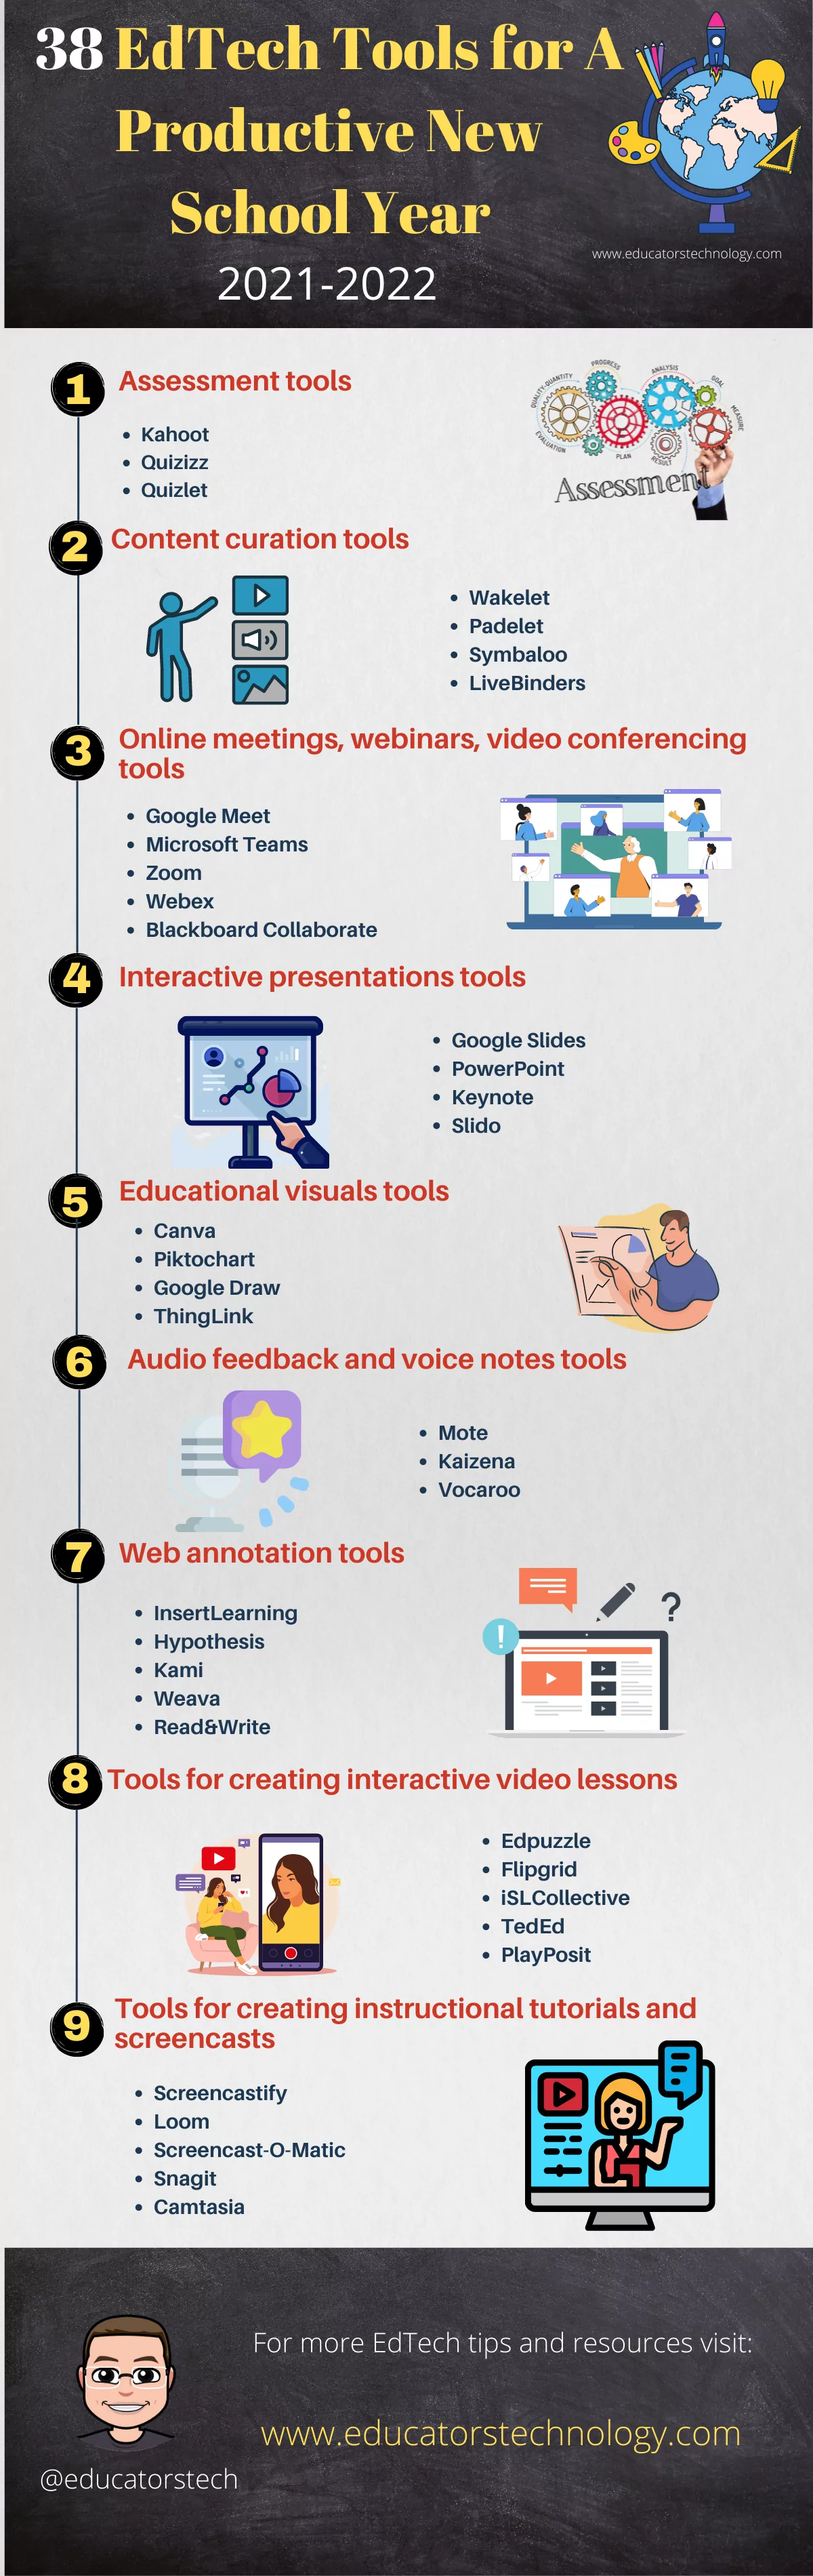 38 EdTech tools to try out in the new school year 2021-2022